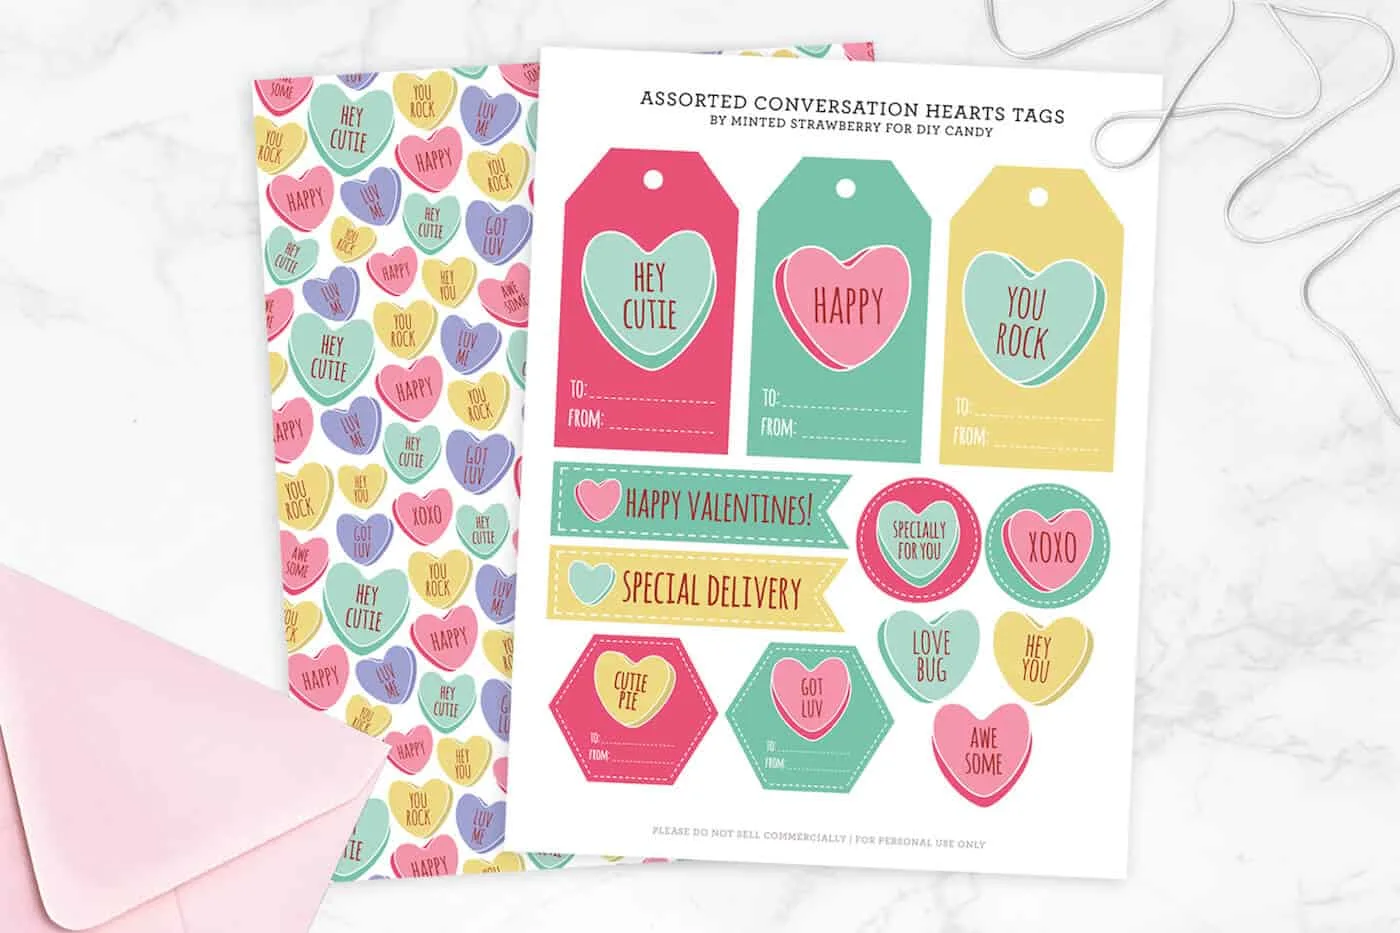 Conversation heart wrapping paper and tags for Valentine's Day